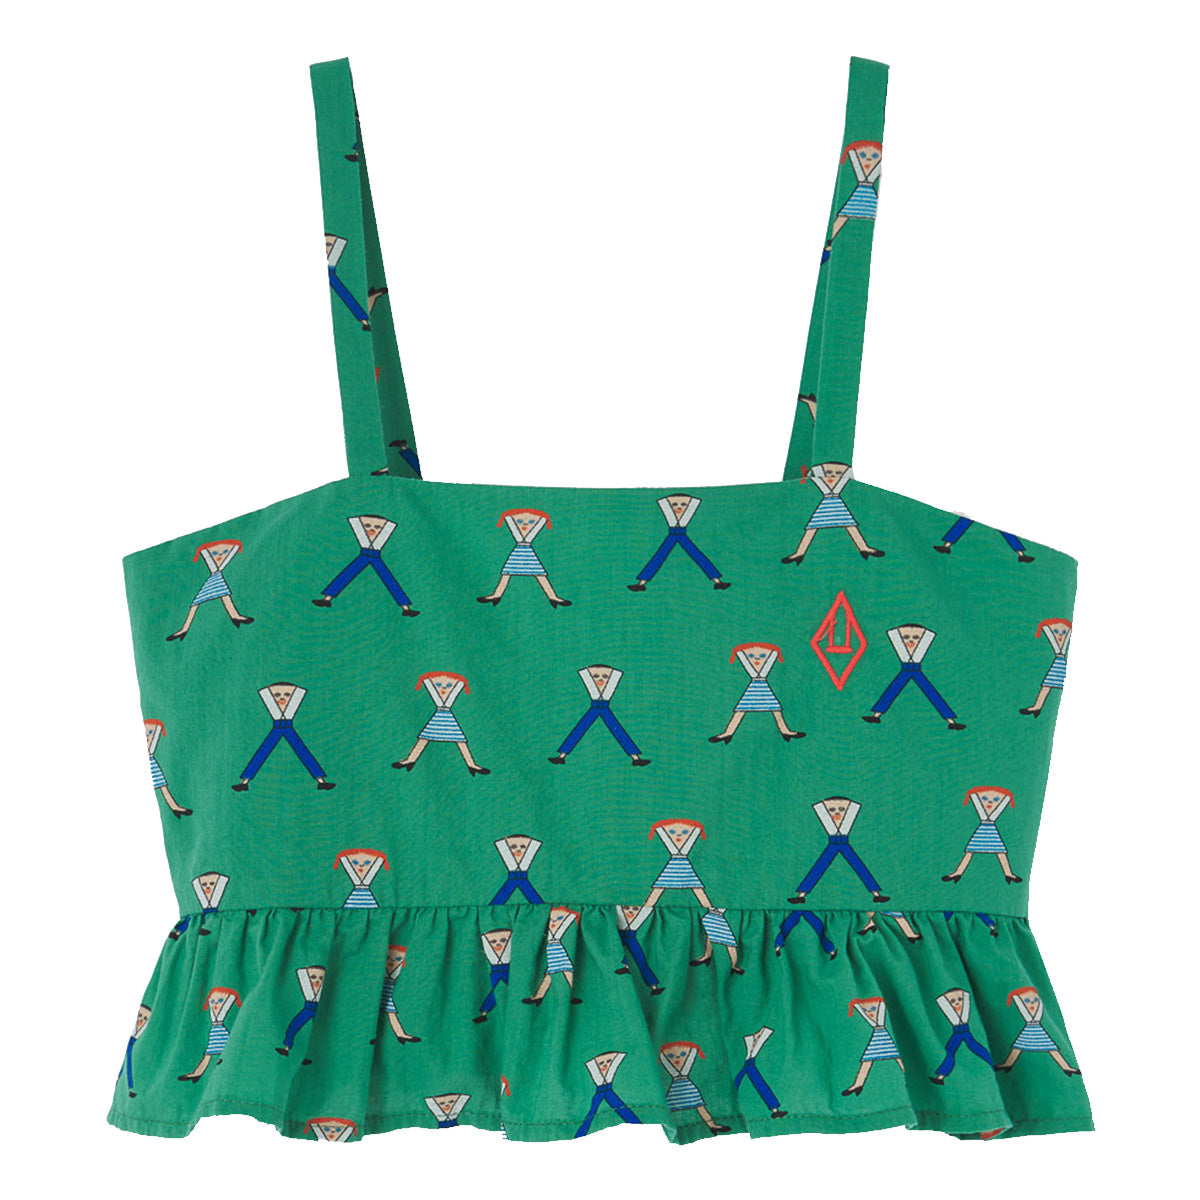 The Stork Blouse from The Animals Observatory in green color and a regular fit